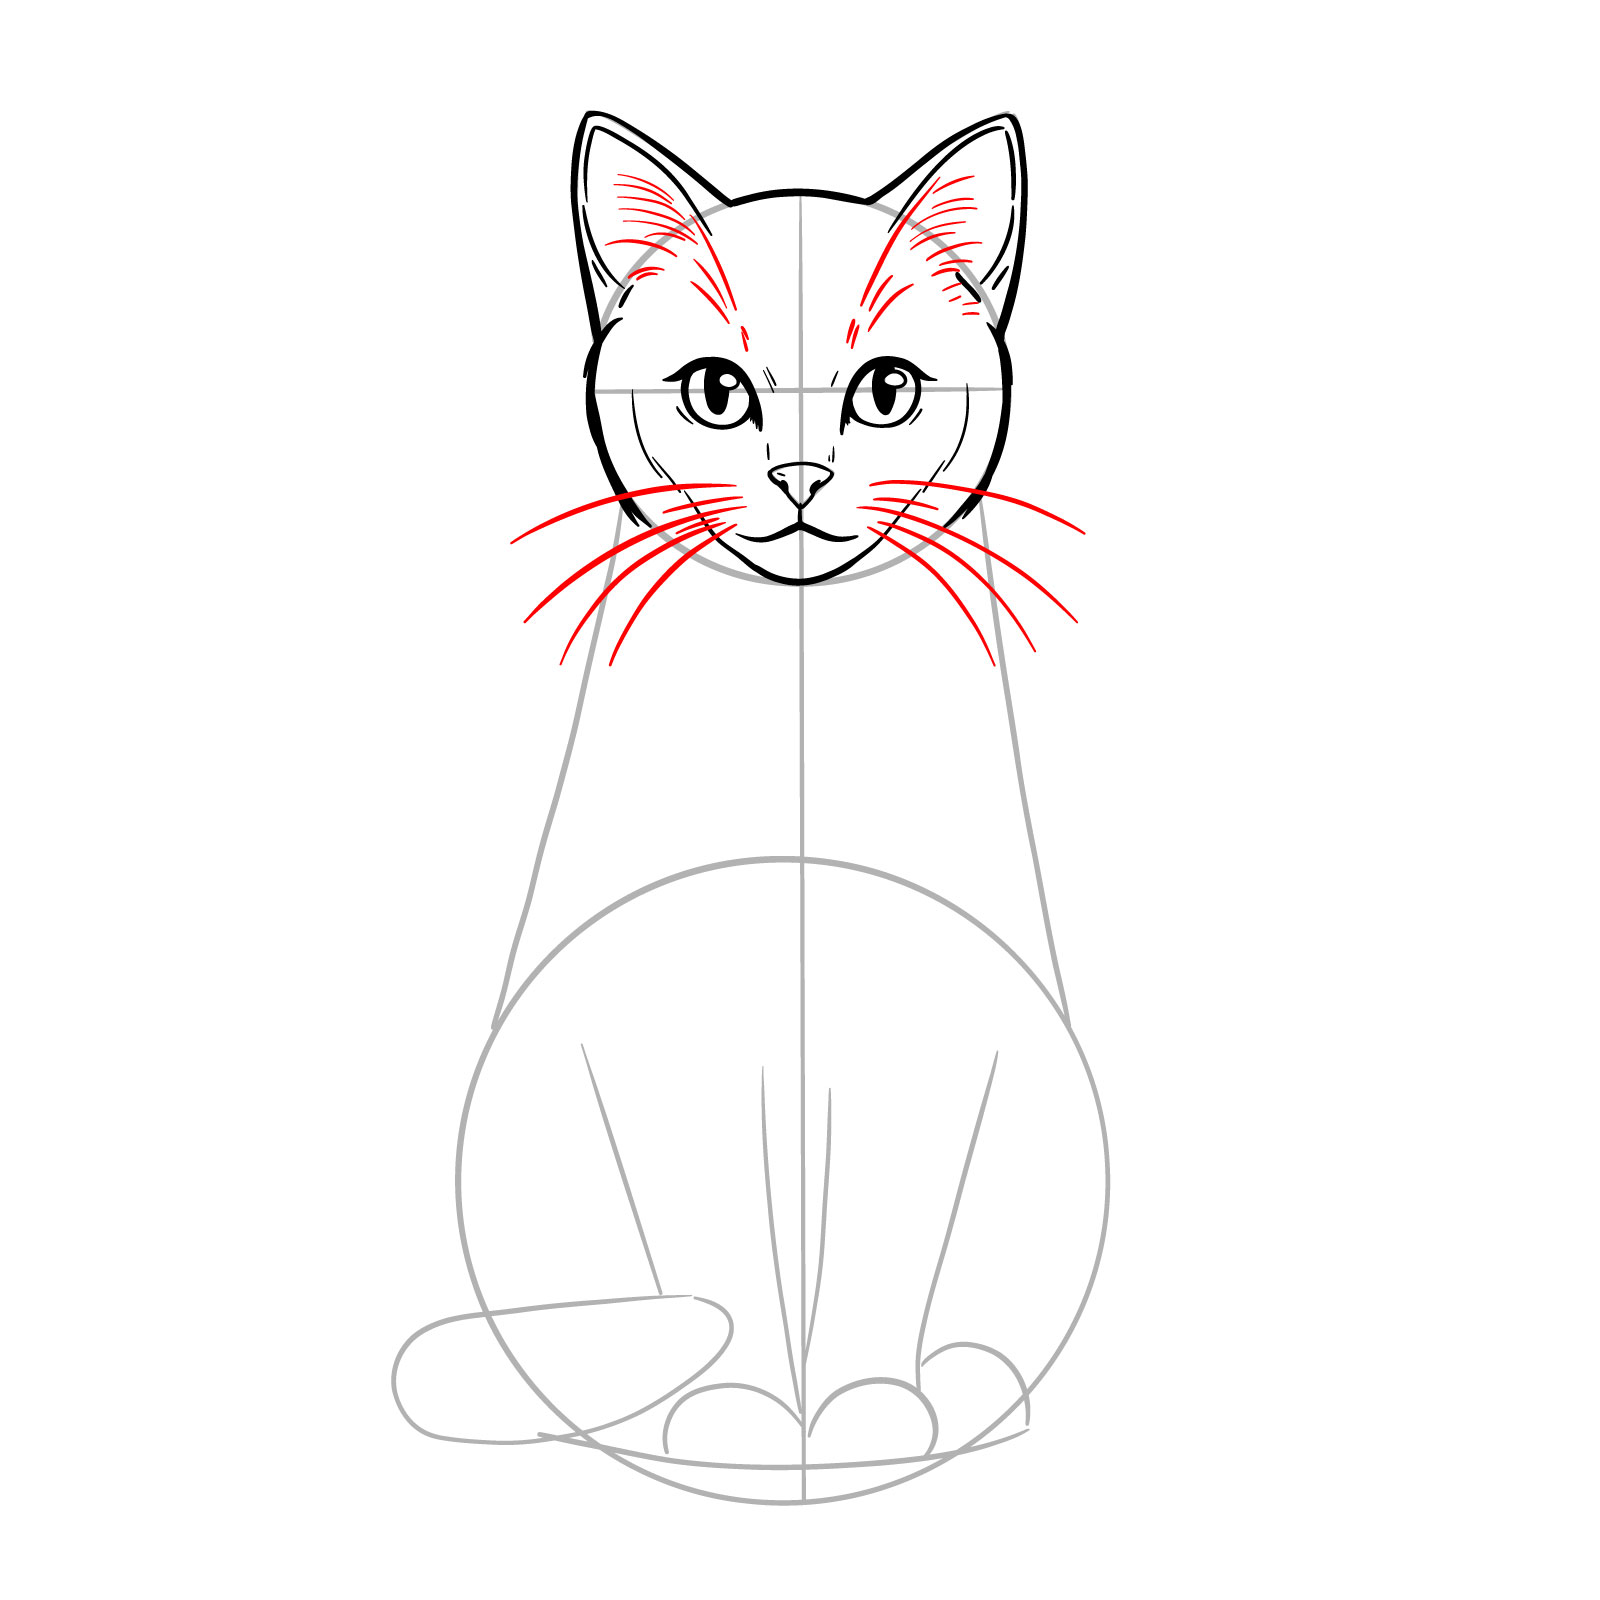 Sketch of a sitting cat adding whiskers and fur detail in the ears - step 10